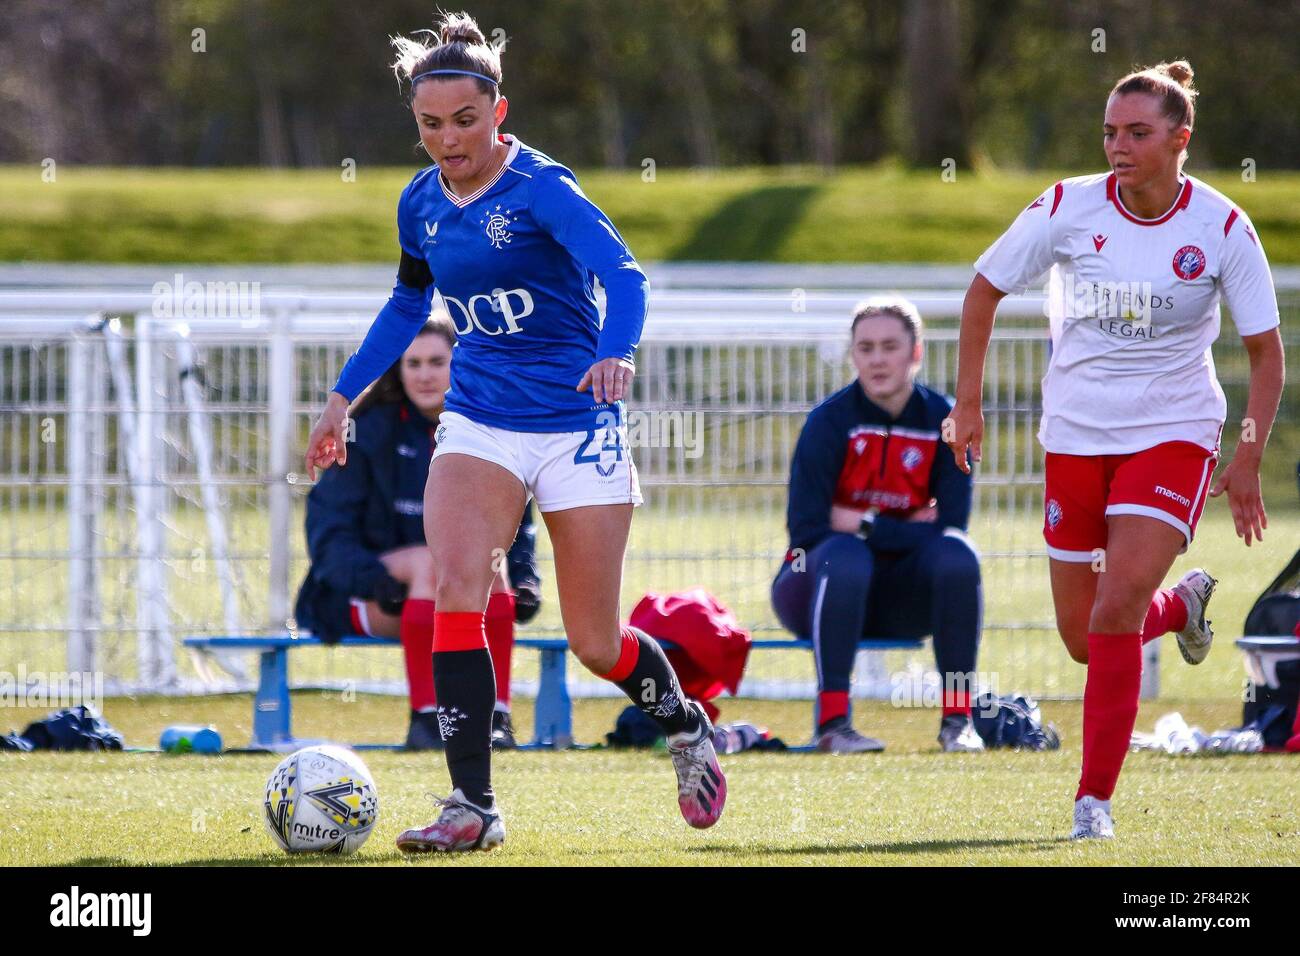 Glasgow, UK. 11th Apr, 2021. Sam Kerr (#24) of Rangers Women FC on the ball during the Scottish Building Society SWPL1 Fixture Rangers FC vs Spartans FC at Rangers Training Centre, Glasgow, 11/04/2021 | Images courtesy of www.collargeimages.co.uk Credit: Colin Poultney/Alamy Live News Stock Photo